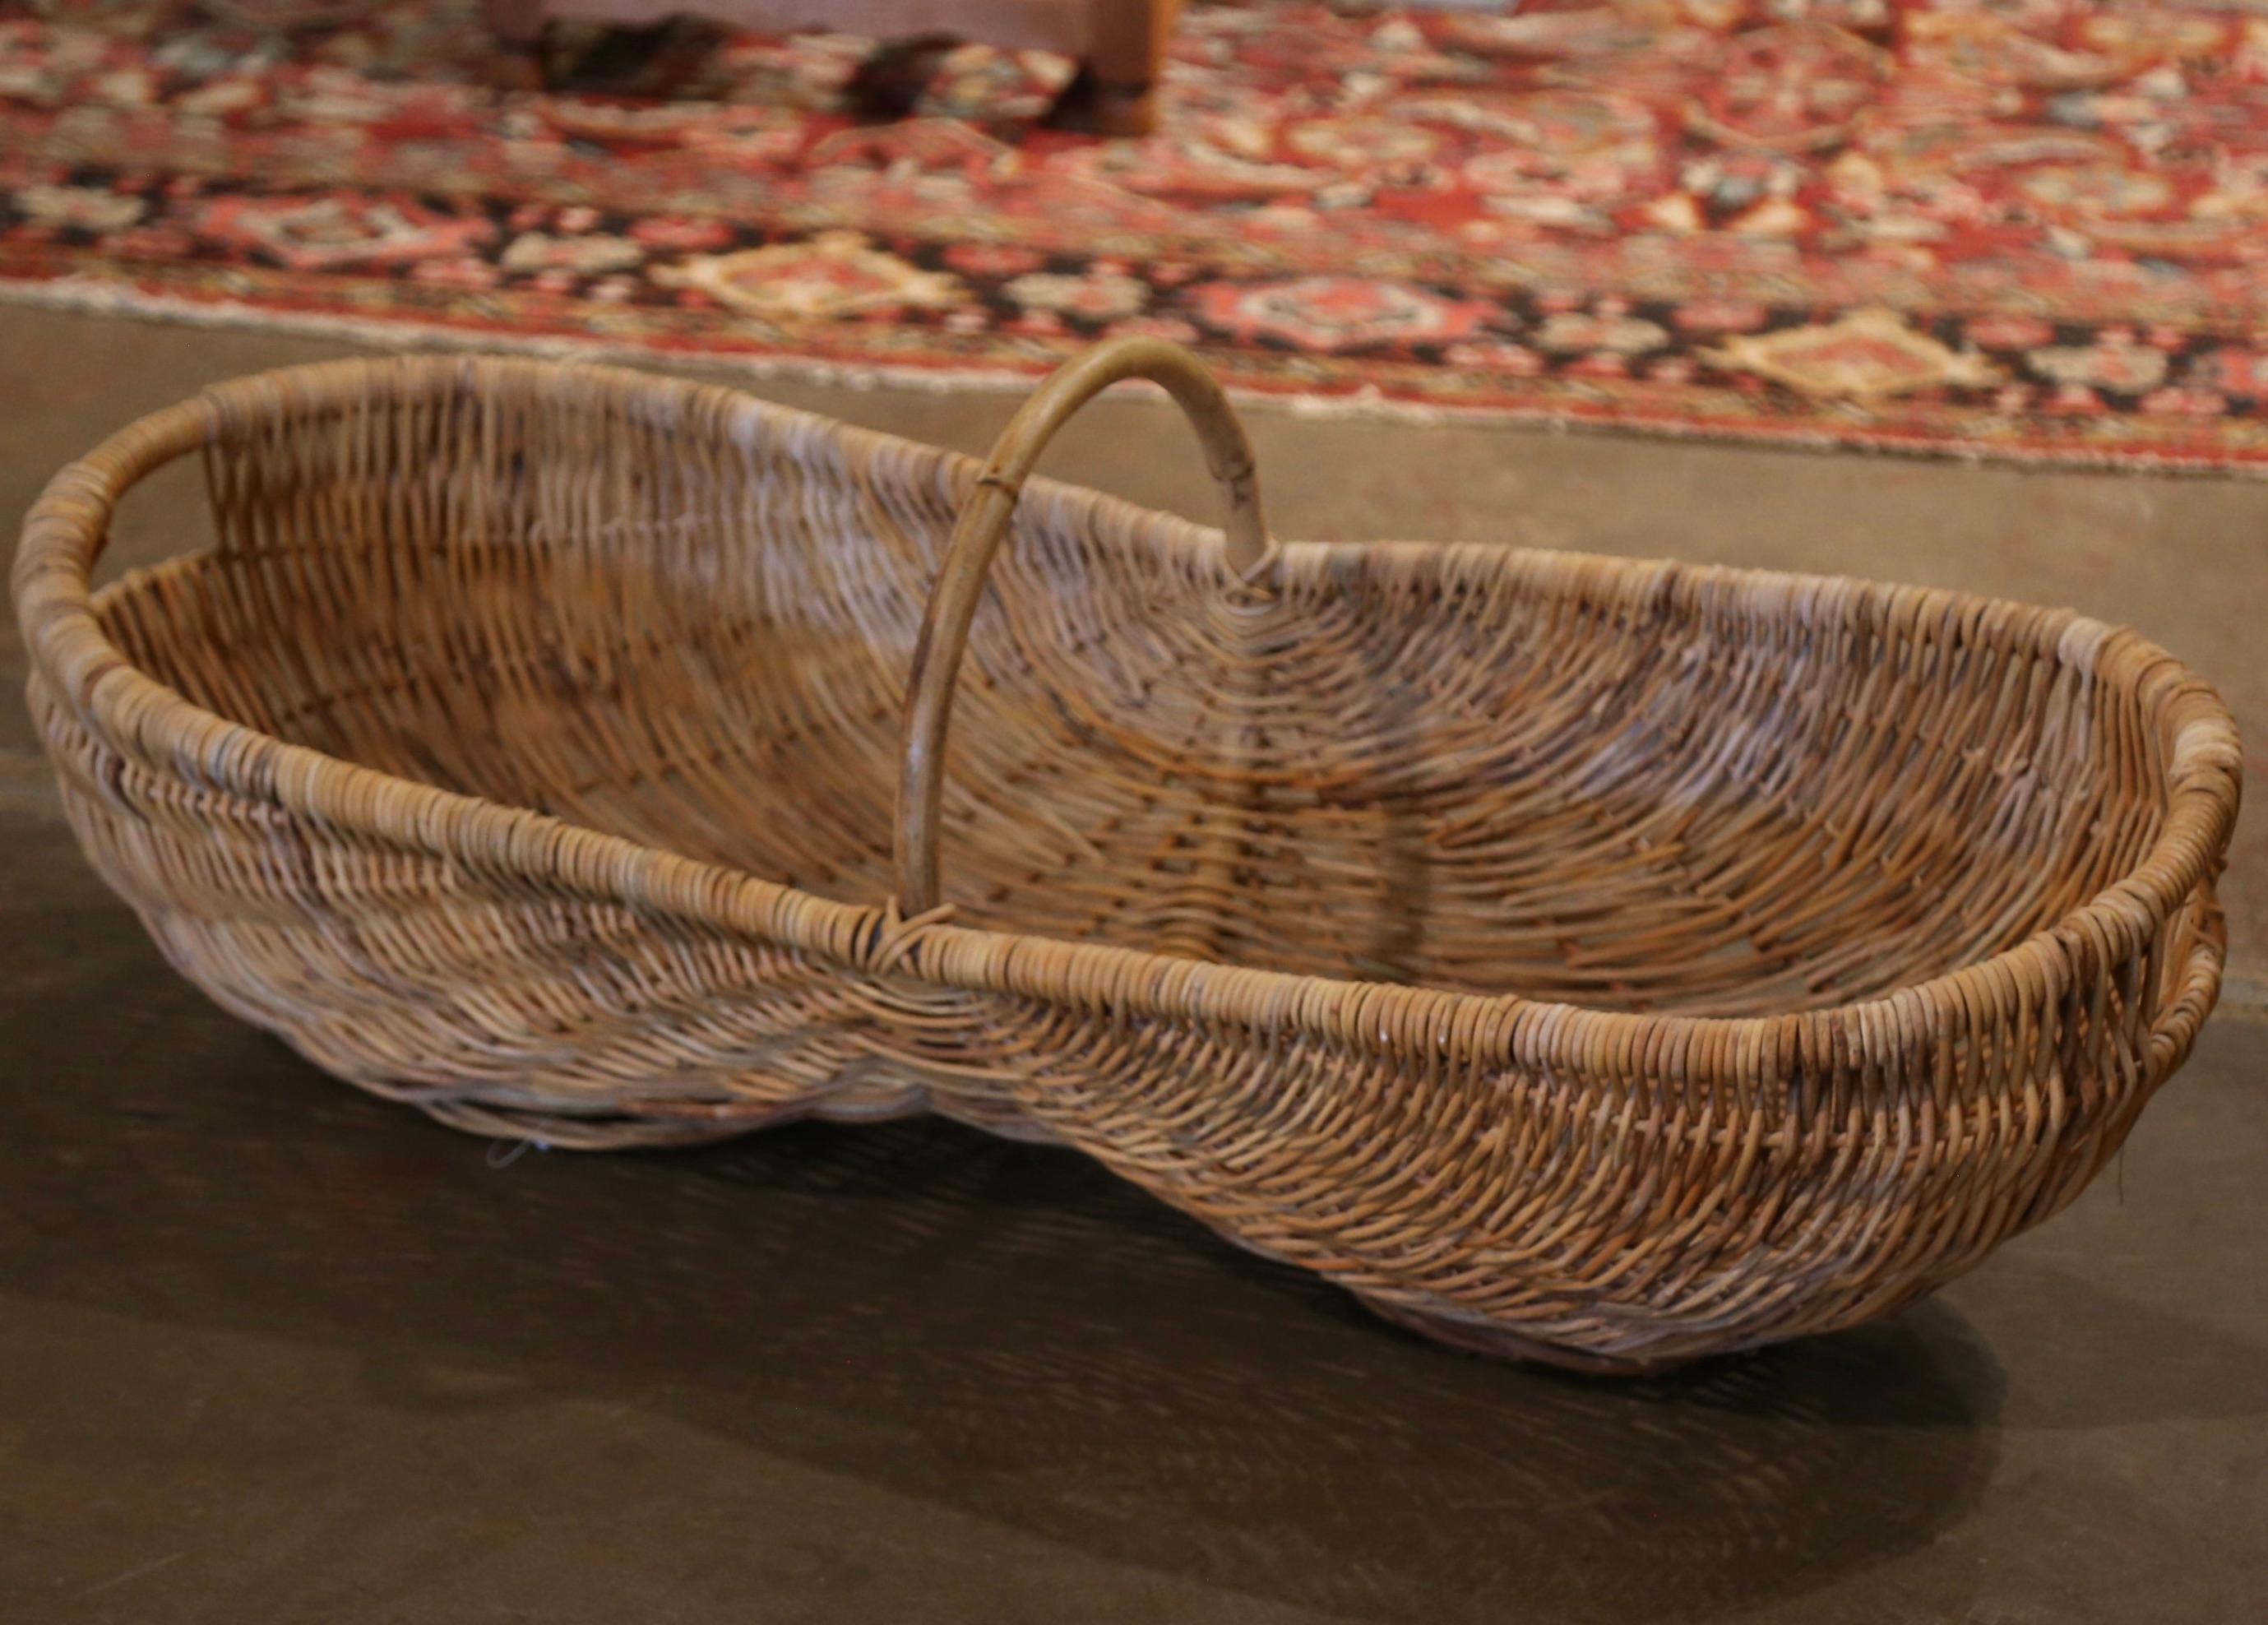 Decorate a wall or a cabinet top full of flowers with this antique basket. Crafted in Normandy or Burgundy circa 1920, the large grape basket dressed with an elegant central arched bamboo handle is handwoven with wicker over a wooden frame. The kind